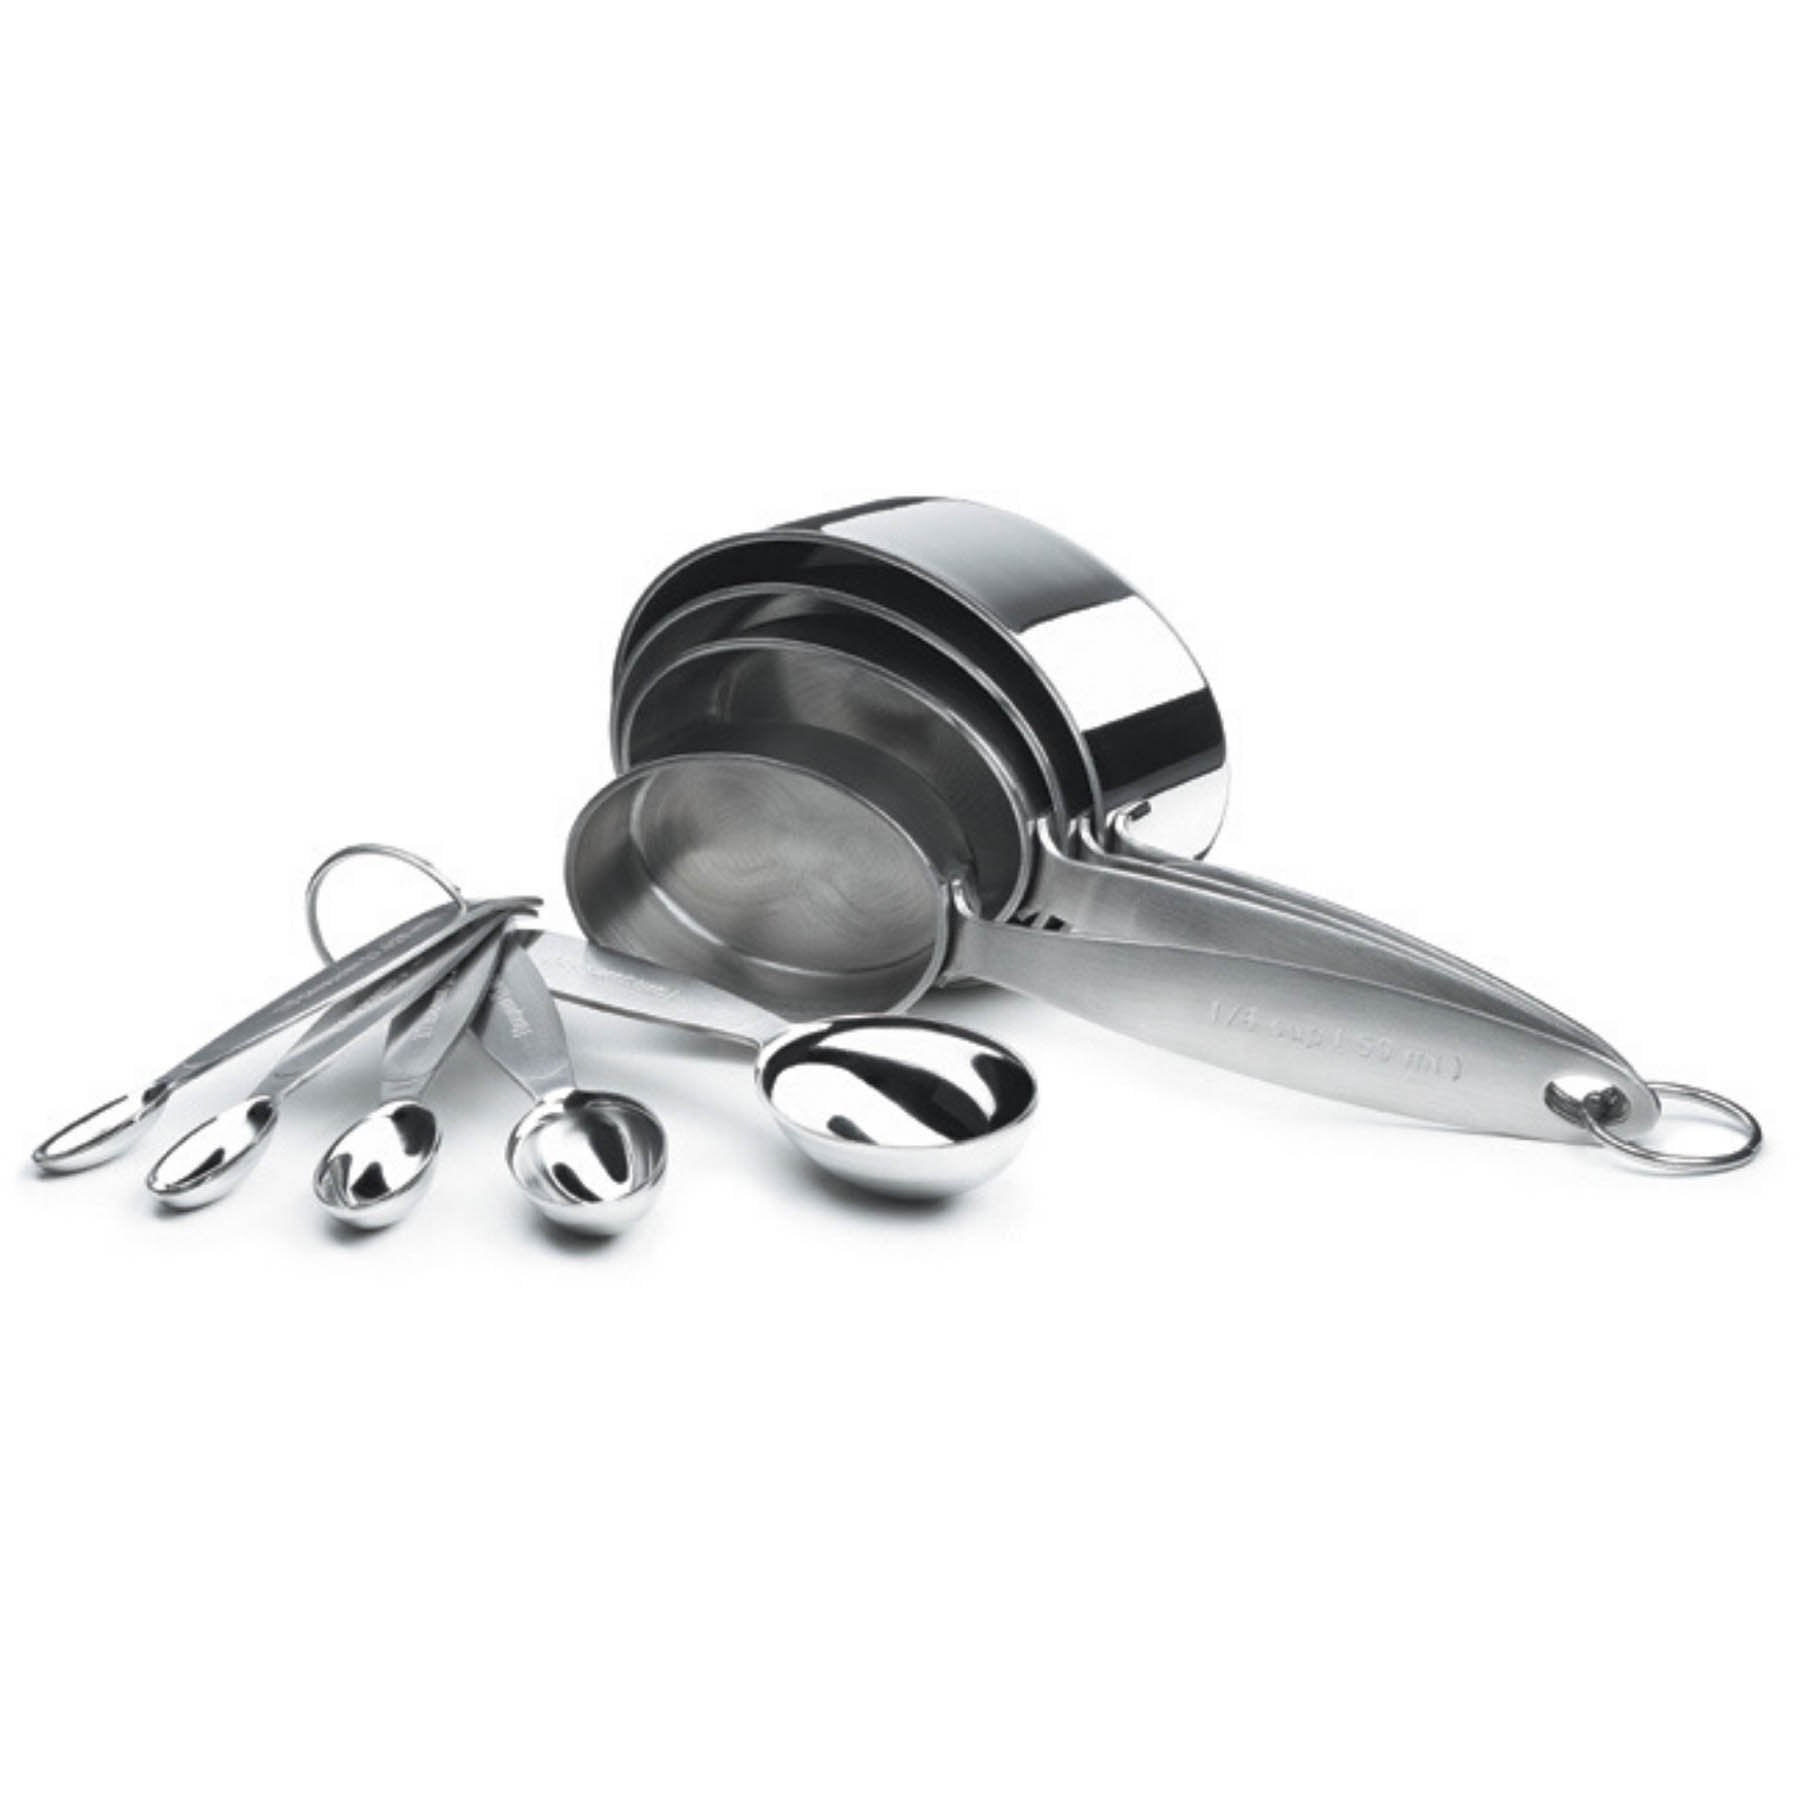 Dash of That™ Stainless Steel Measuring Cup Set - Silver, 4 pc - Fry's Food  Stores